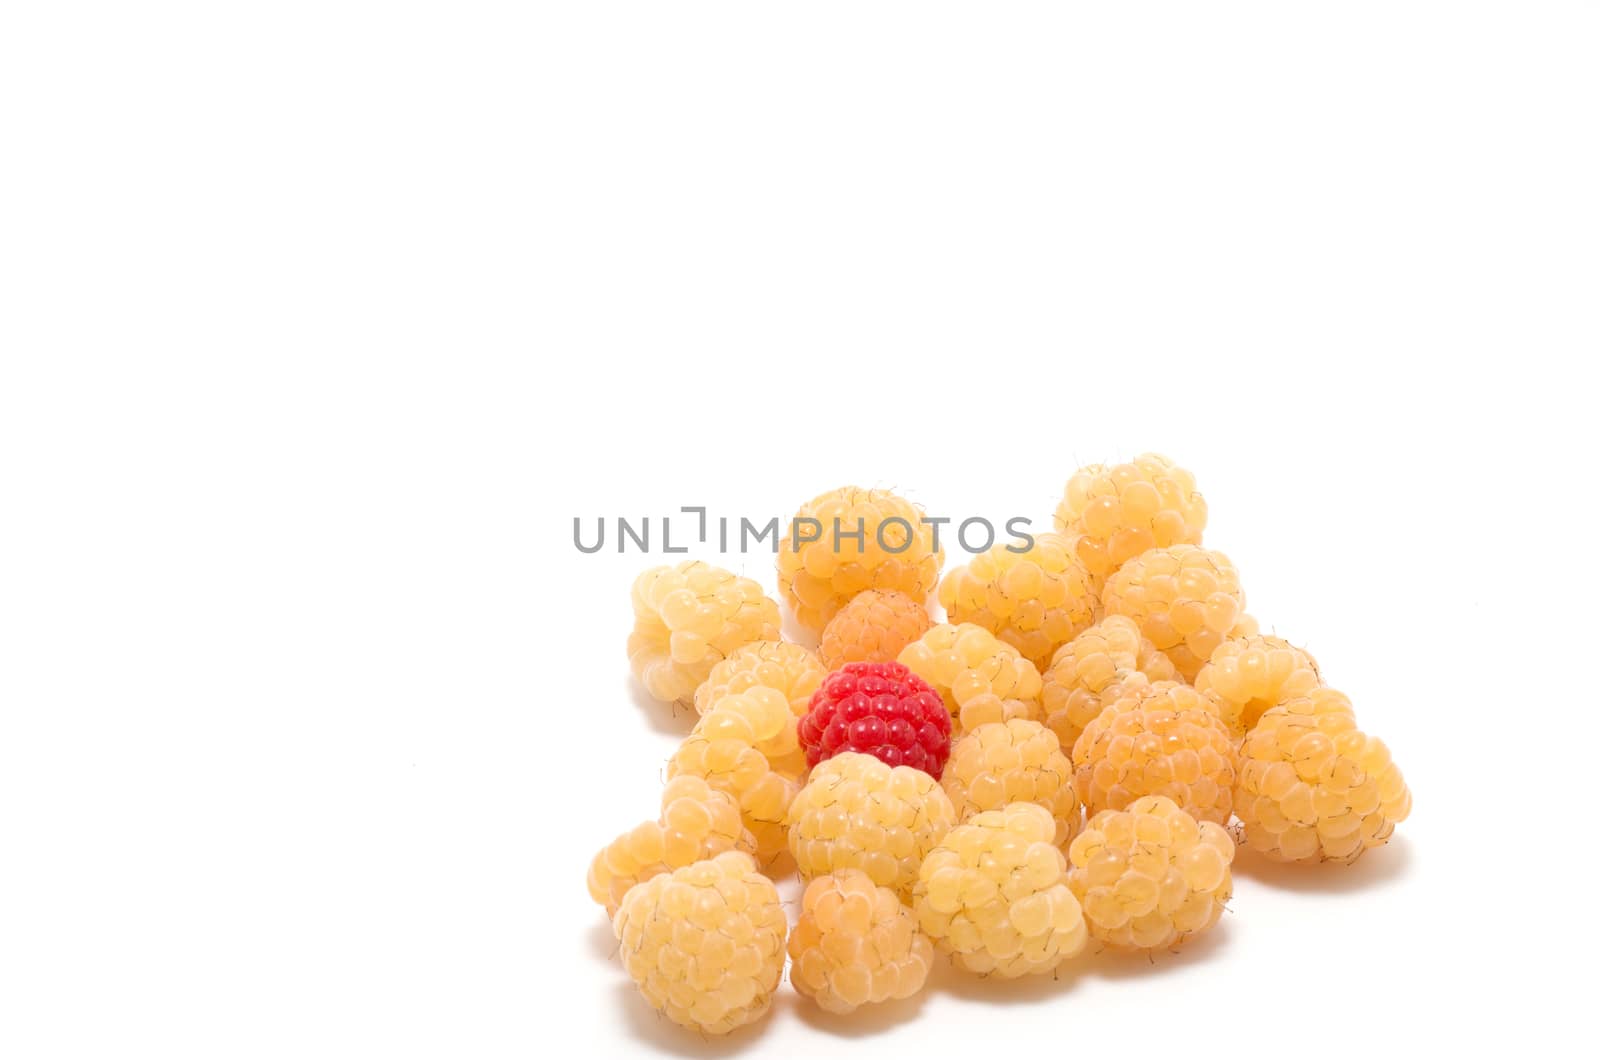 Integration concept, one red among several yellow raspberries 